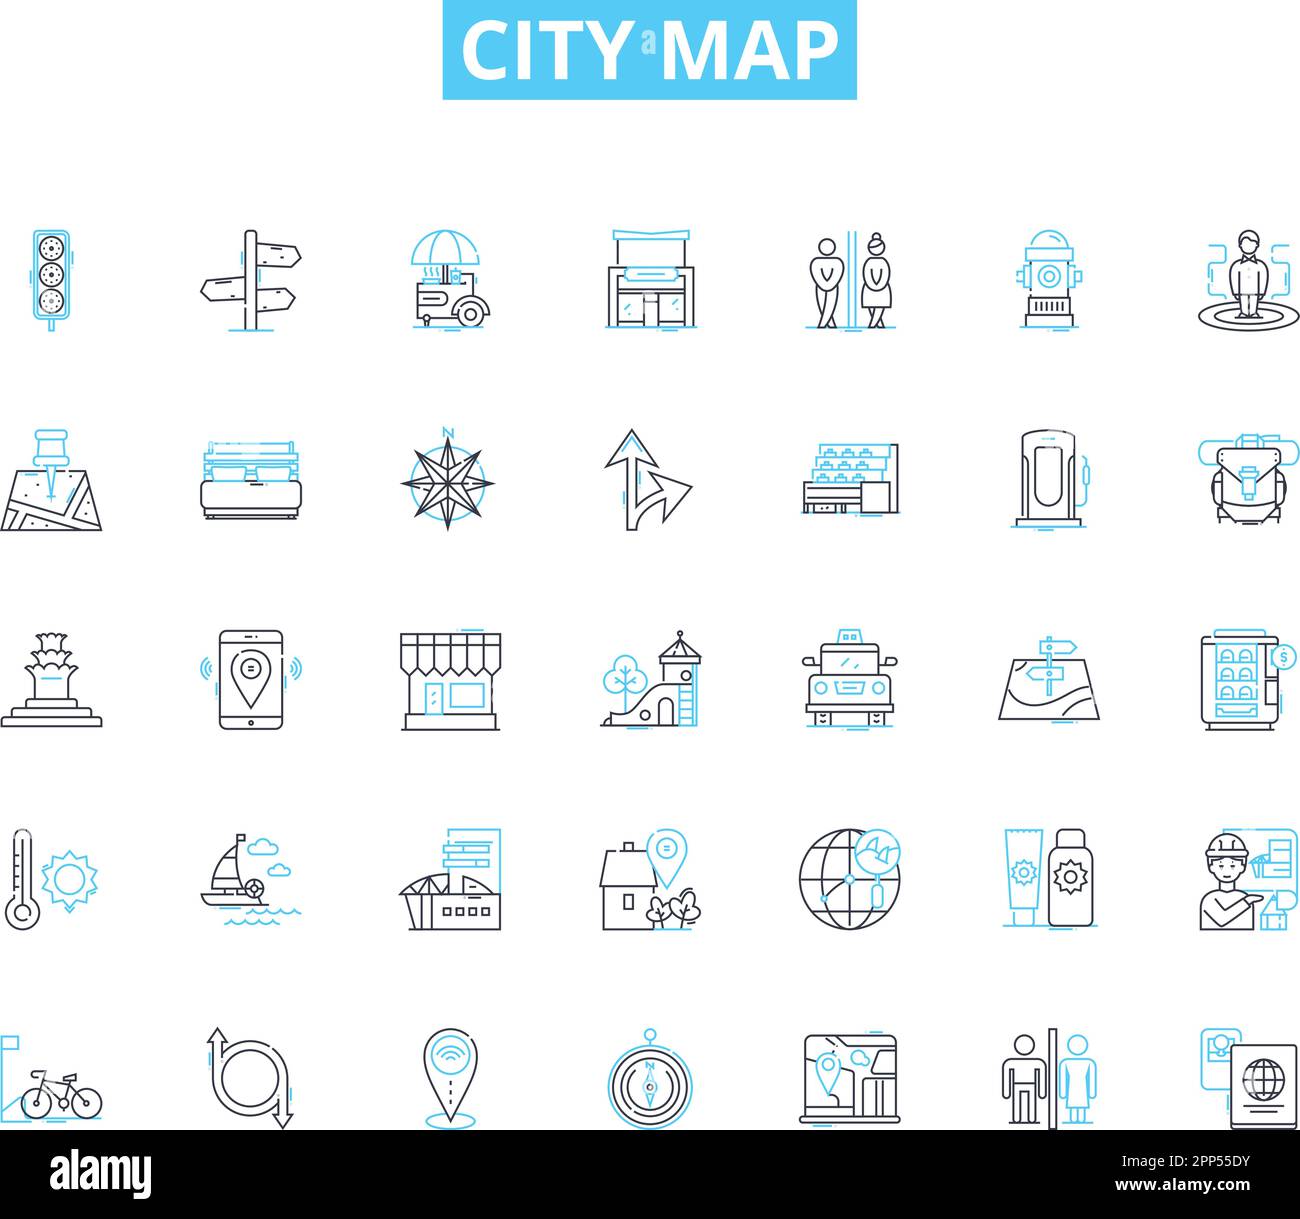 City map linear icons set. Navigation, Tourist, Streets, Districts, Landmarks, Transit, Tour line vector and concept signs. Guide,Directions Stock Vector